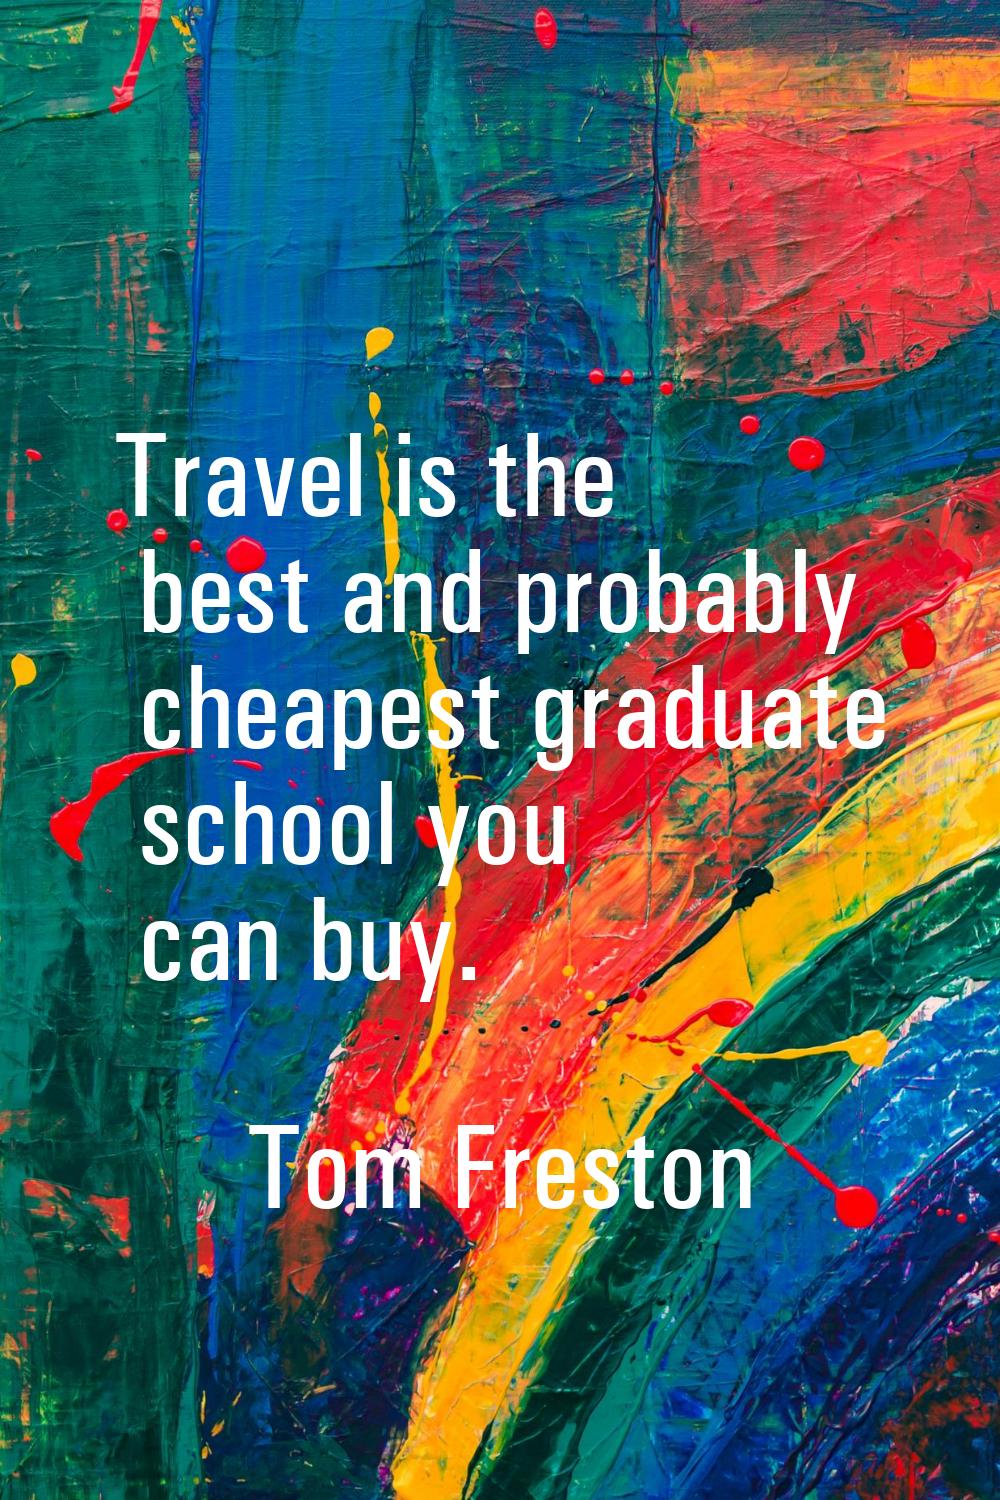 Travel is the best and probably cheapest graduate school you can buy.